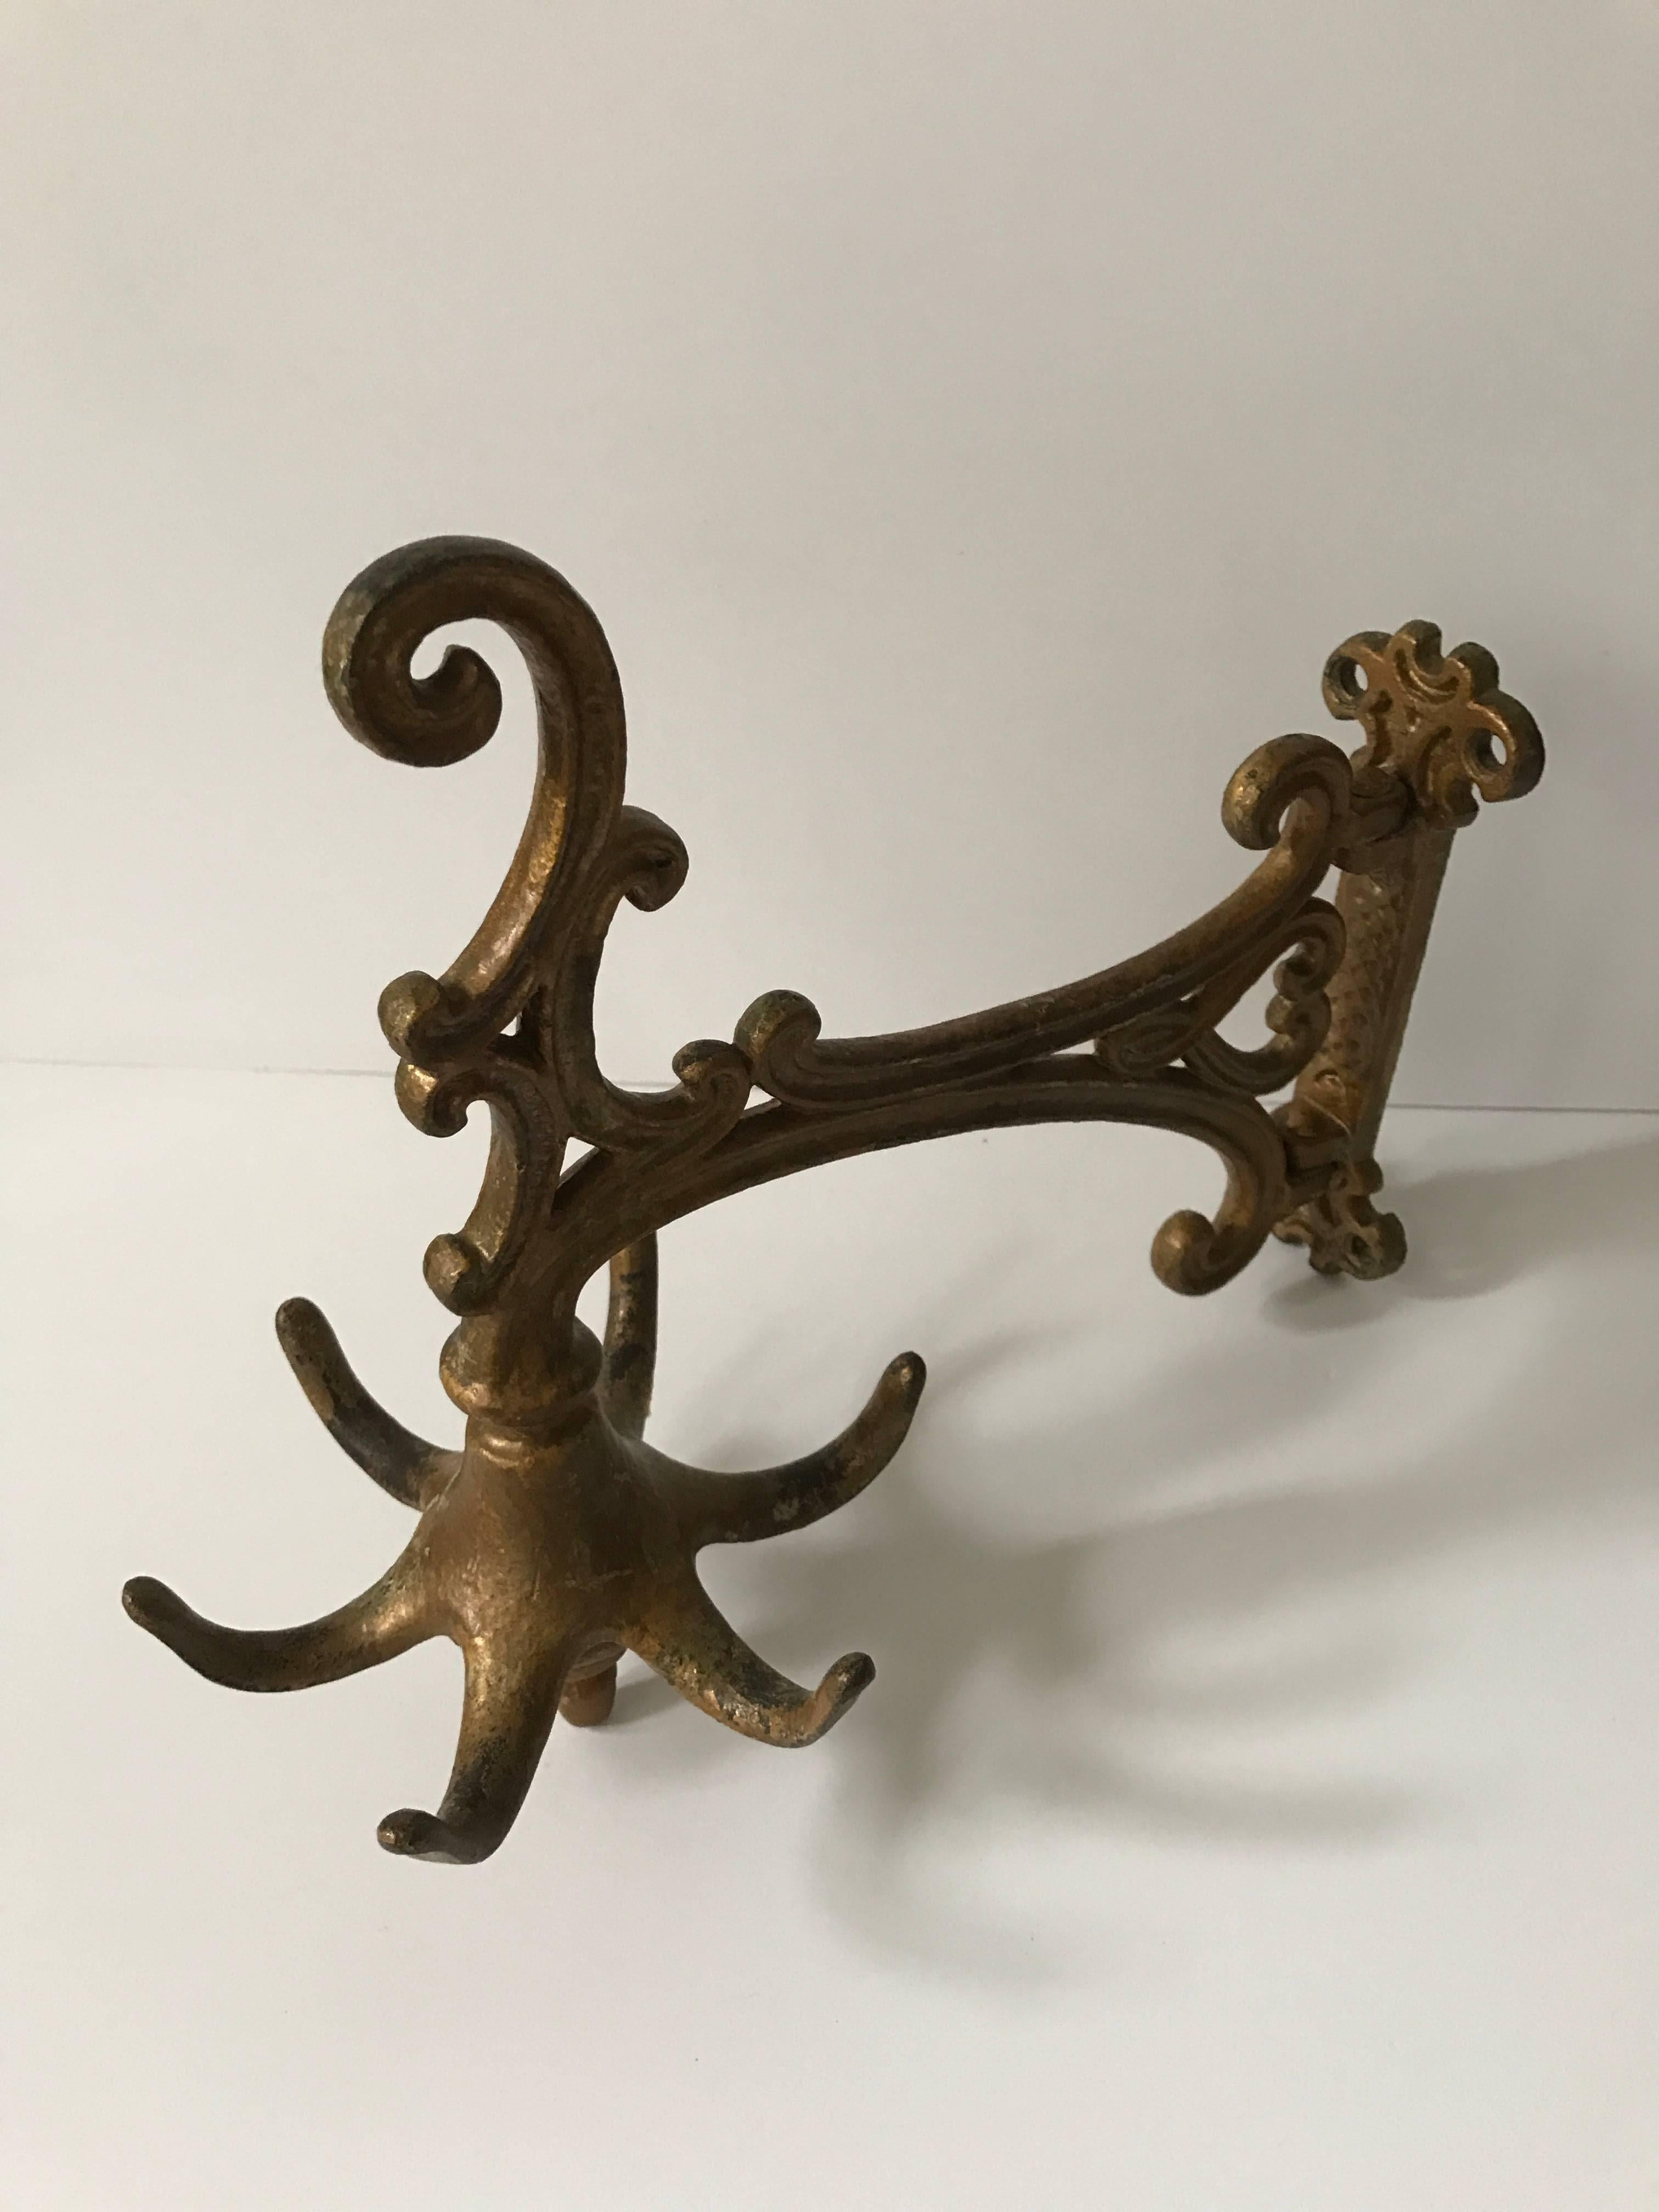 A beautiful coat hanger or coat rack that should be mounted to the wall. This was made during the late 19th century and is most likely Swedish. It is patinated as brass or bronze but is made of cast iron. It is 29cm in length and 25 cm in height and